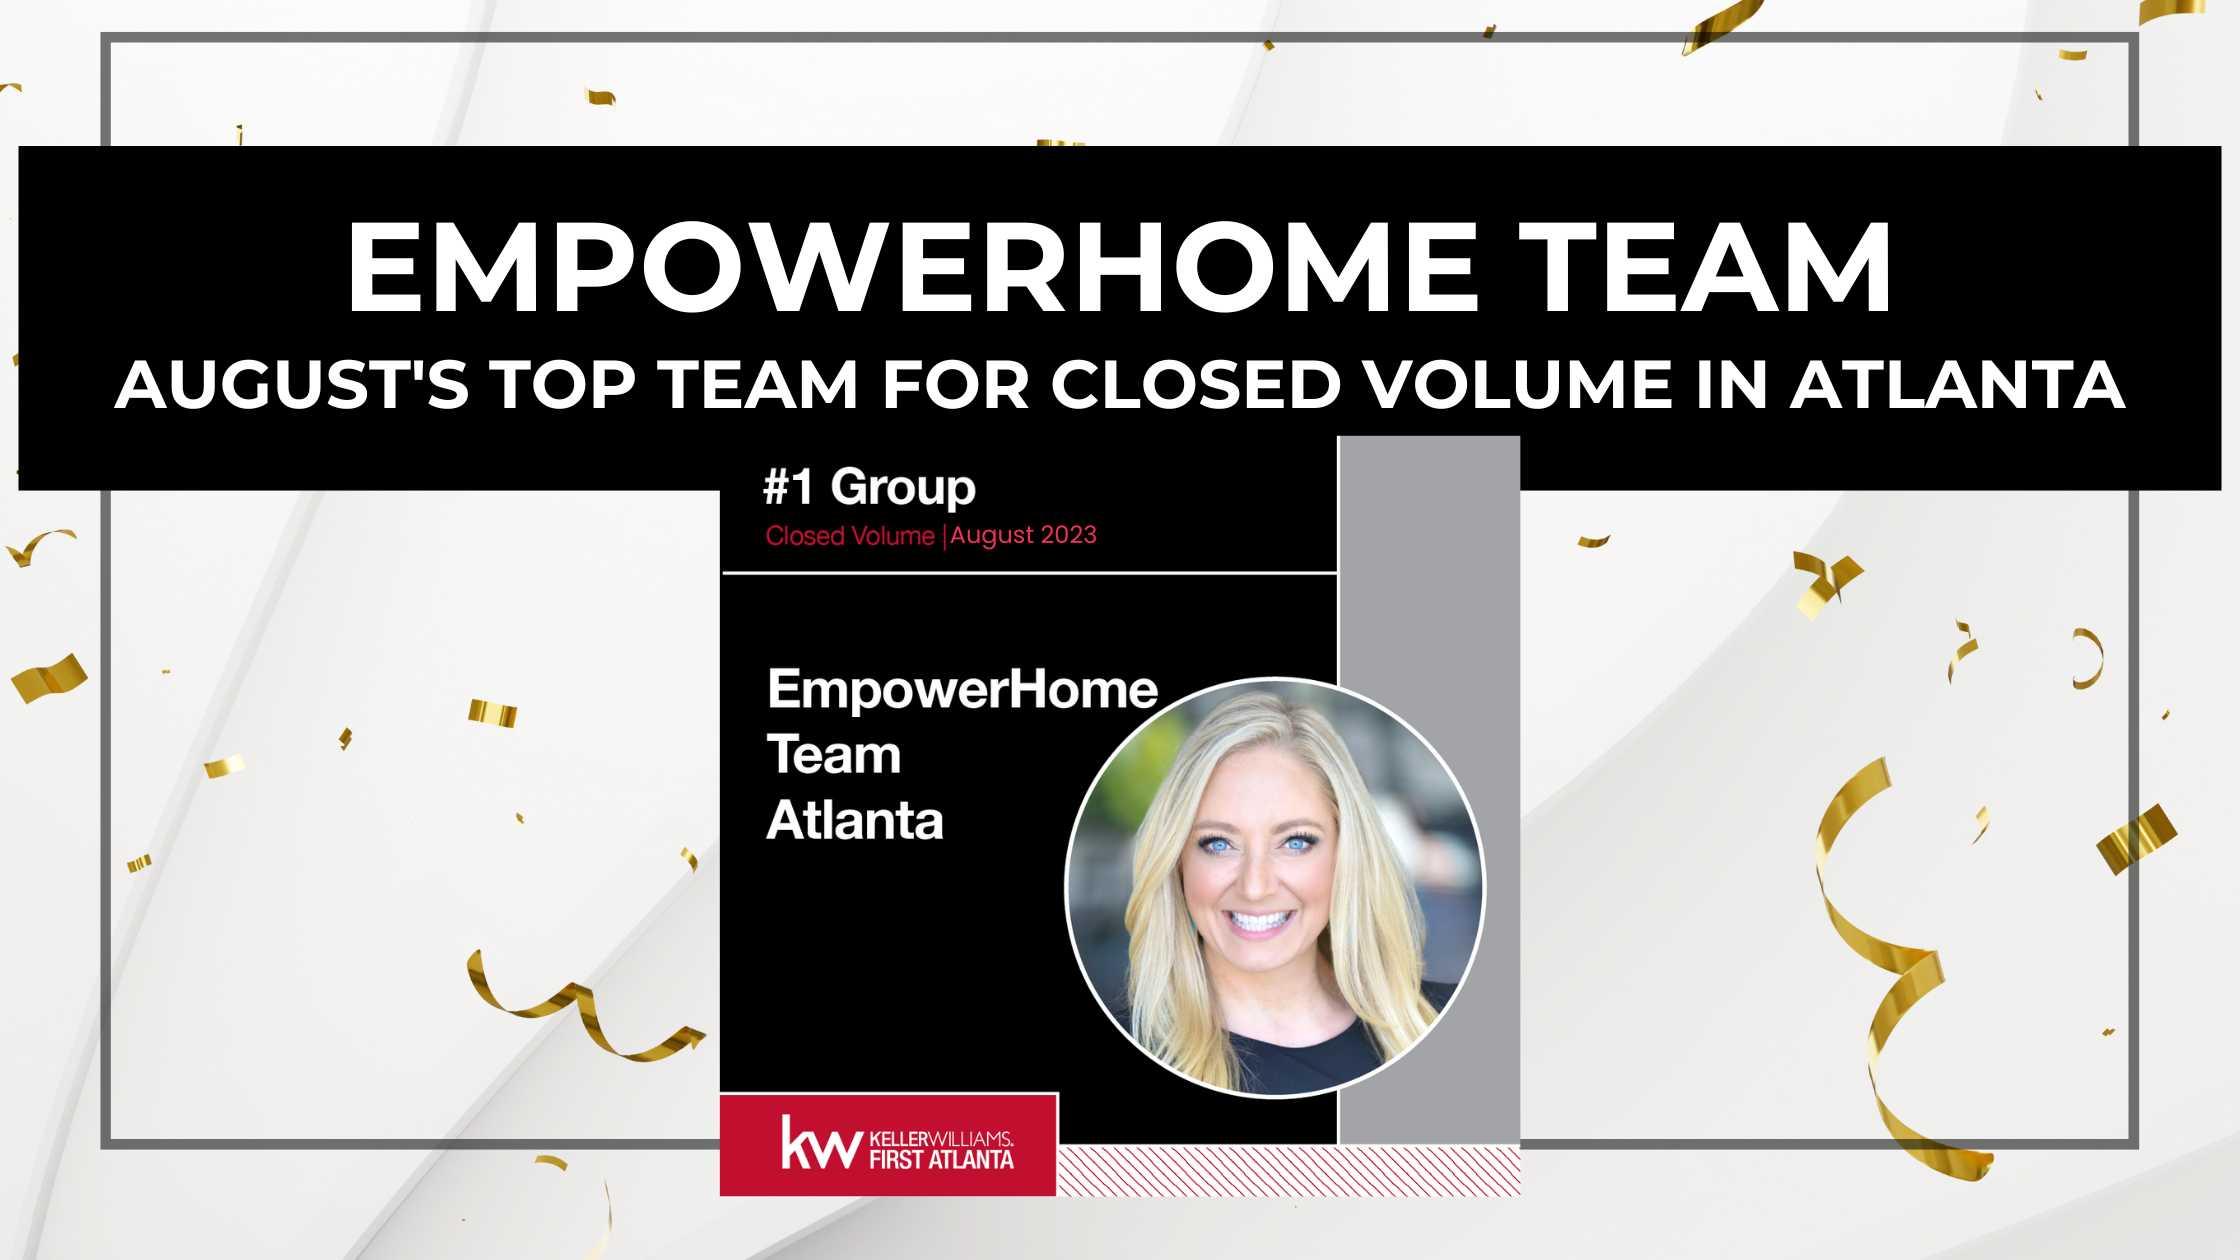 Linde Moore and EmpowerHome Team Named Top Team for Closed Volume in August by Keller Williams First Atlanta!